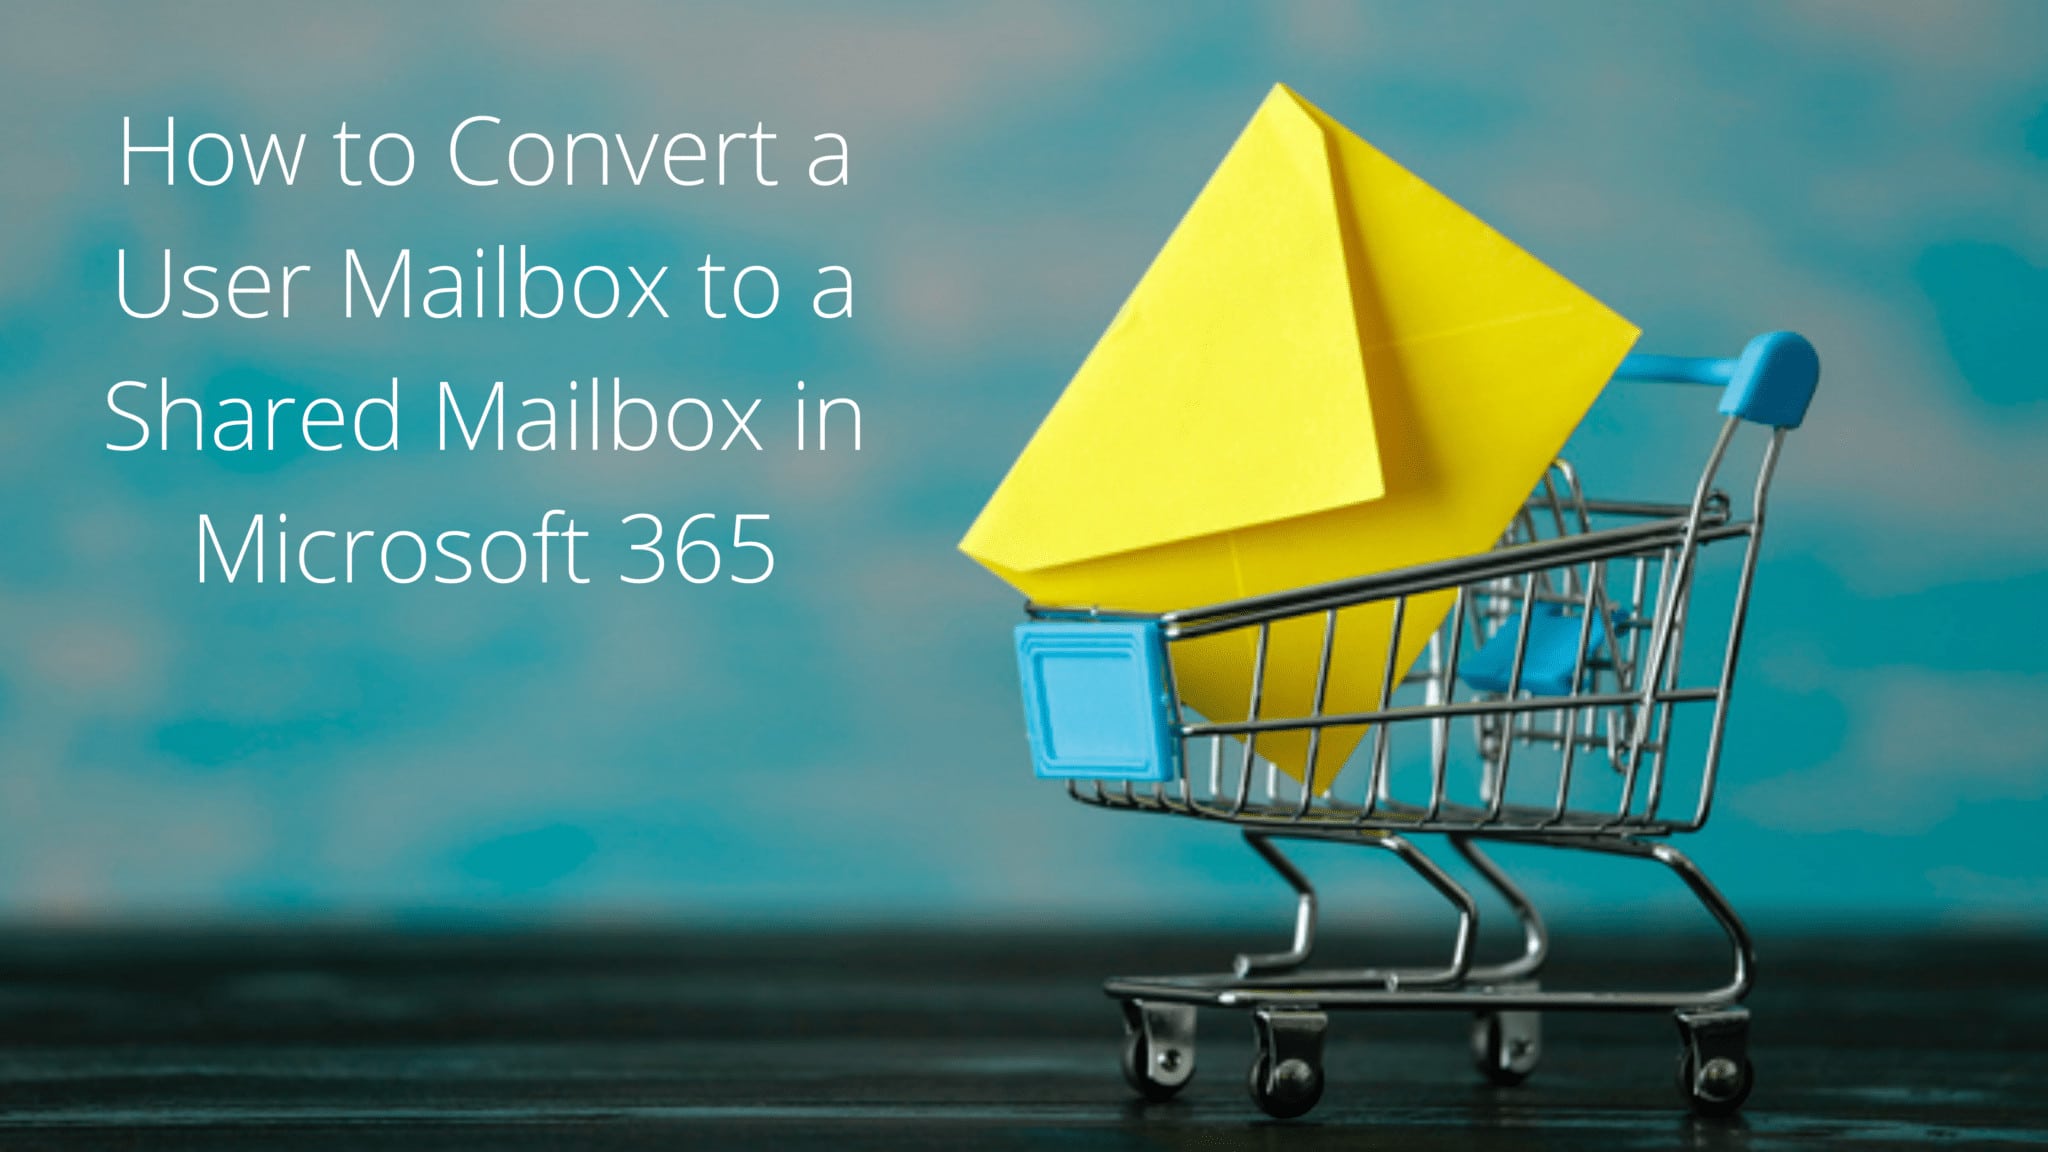 How to Convert a User Mailbox to a Shared Mailbox in Microsoft 365